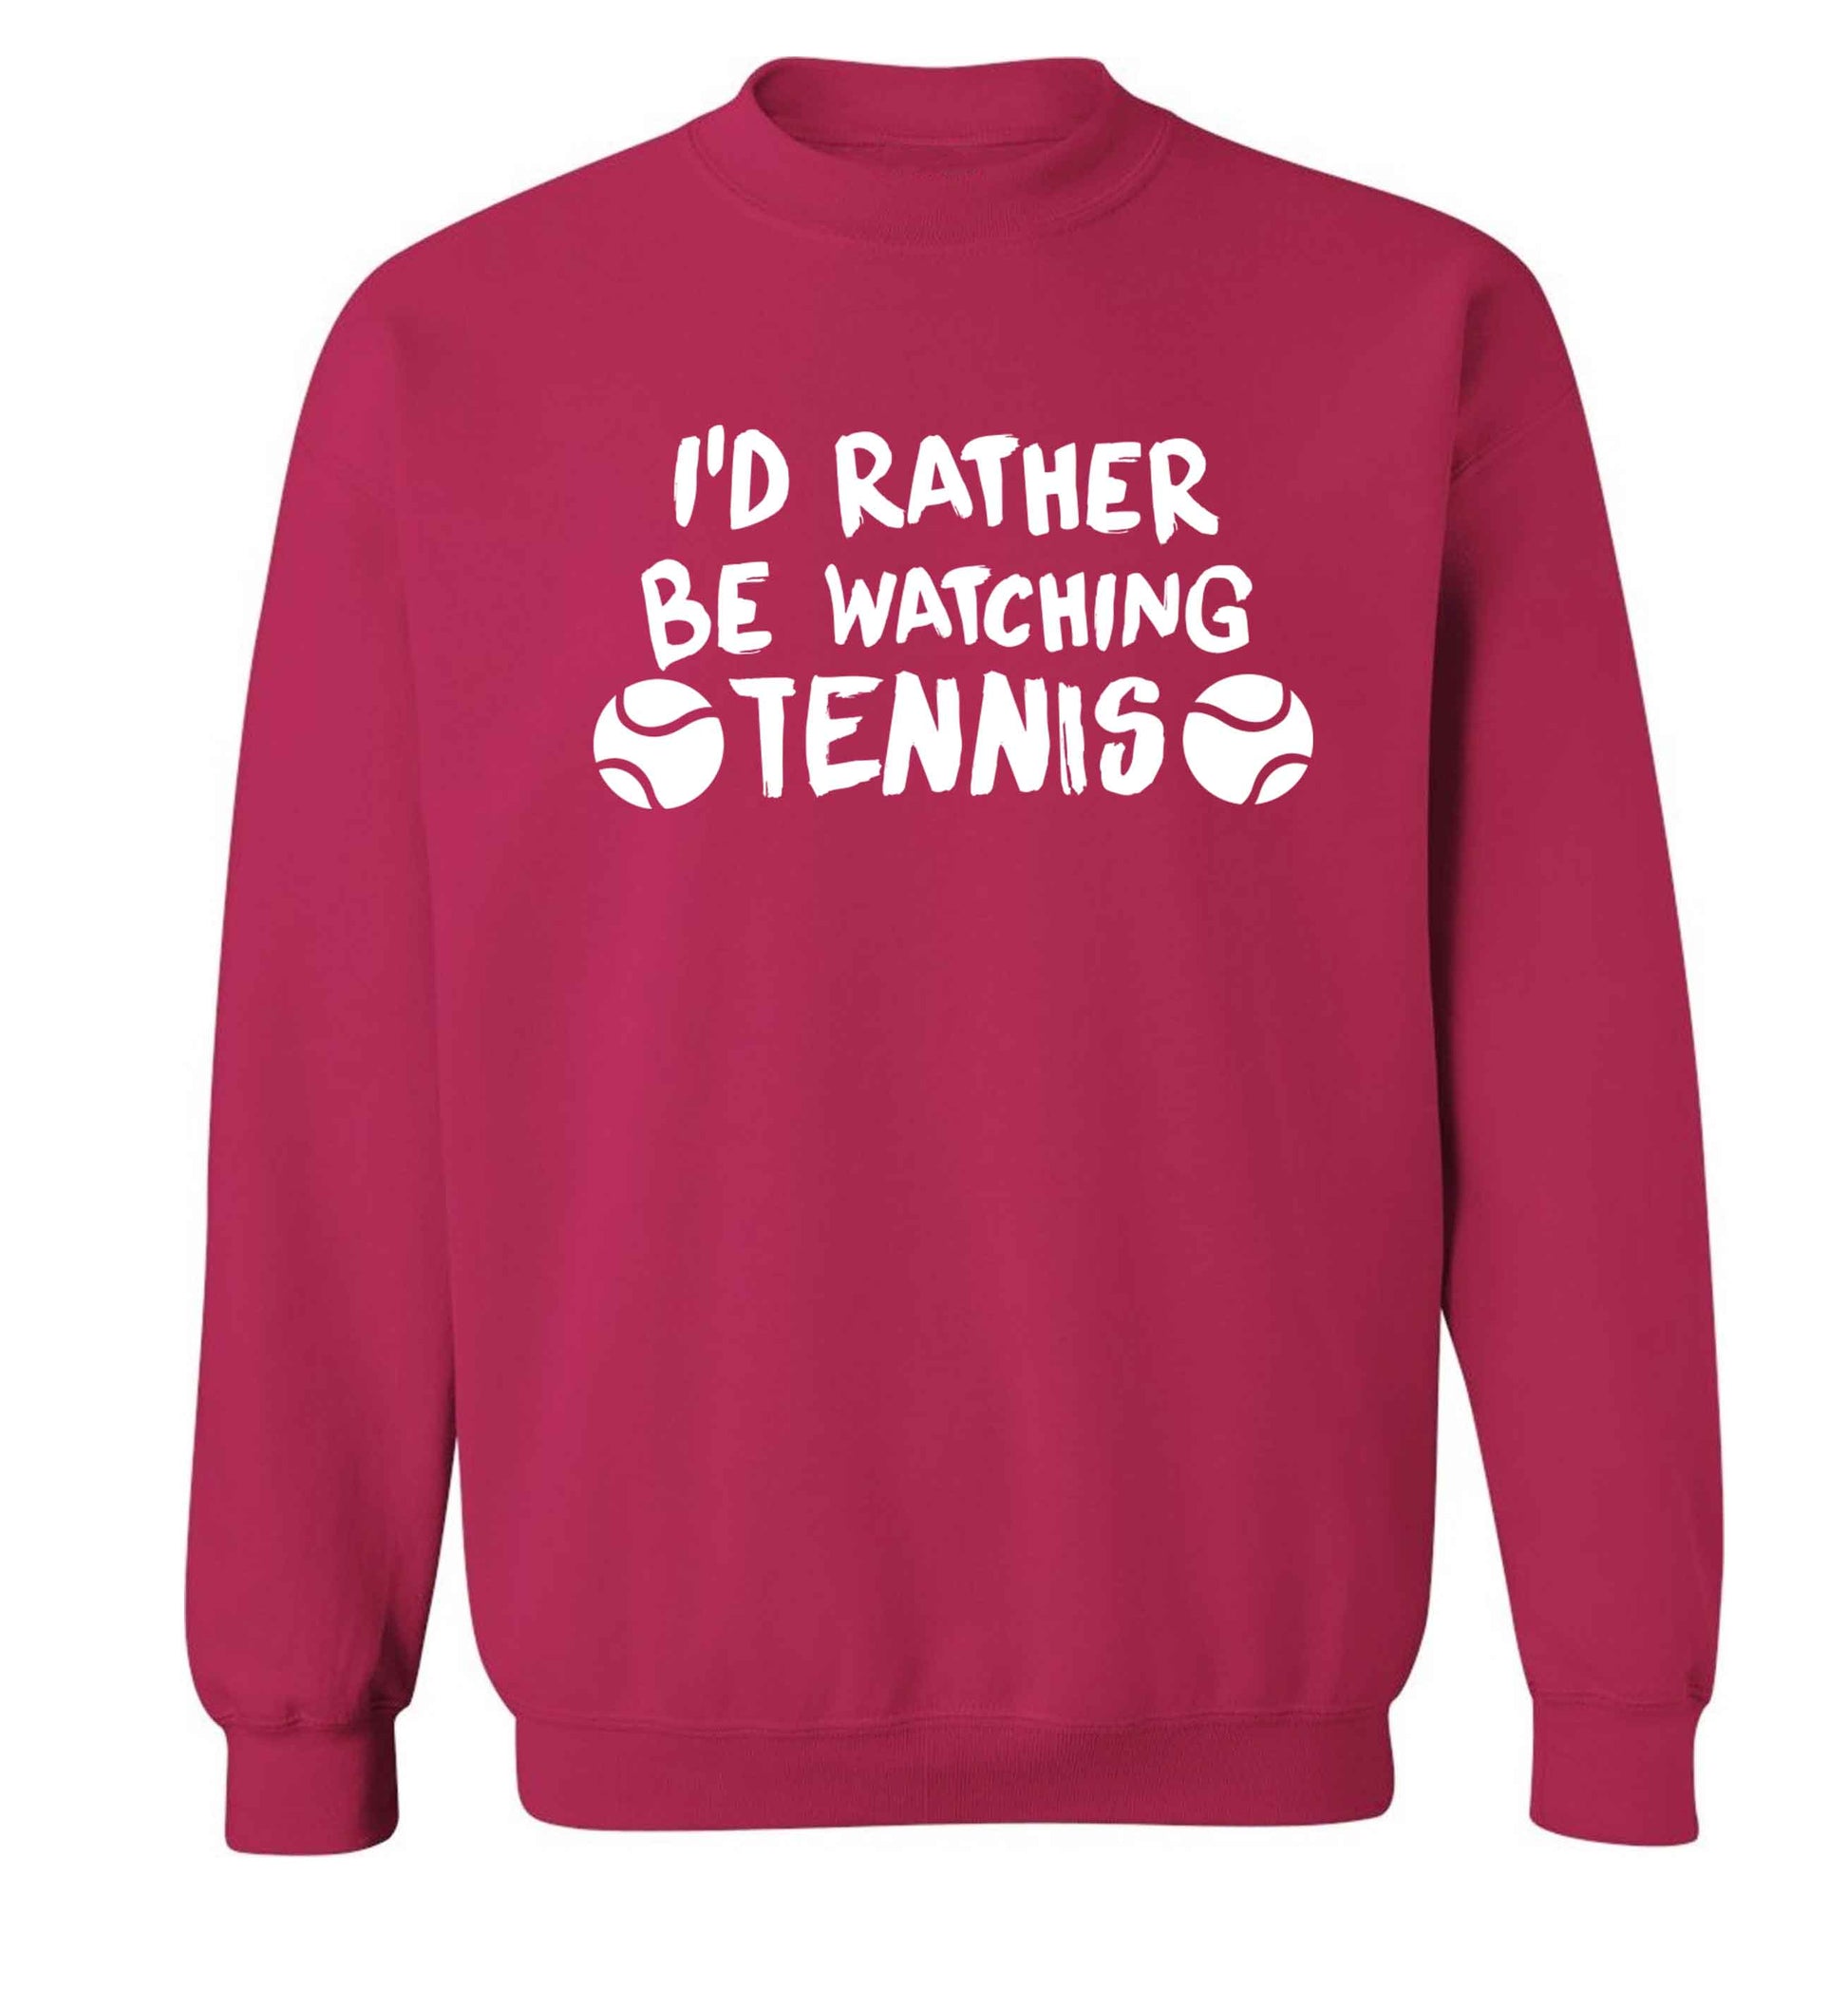 I'd rather be watching the tennis Adult's unisex pink Sweater 2XL